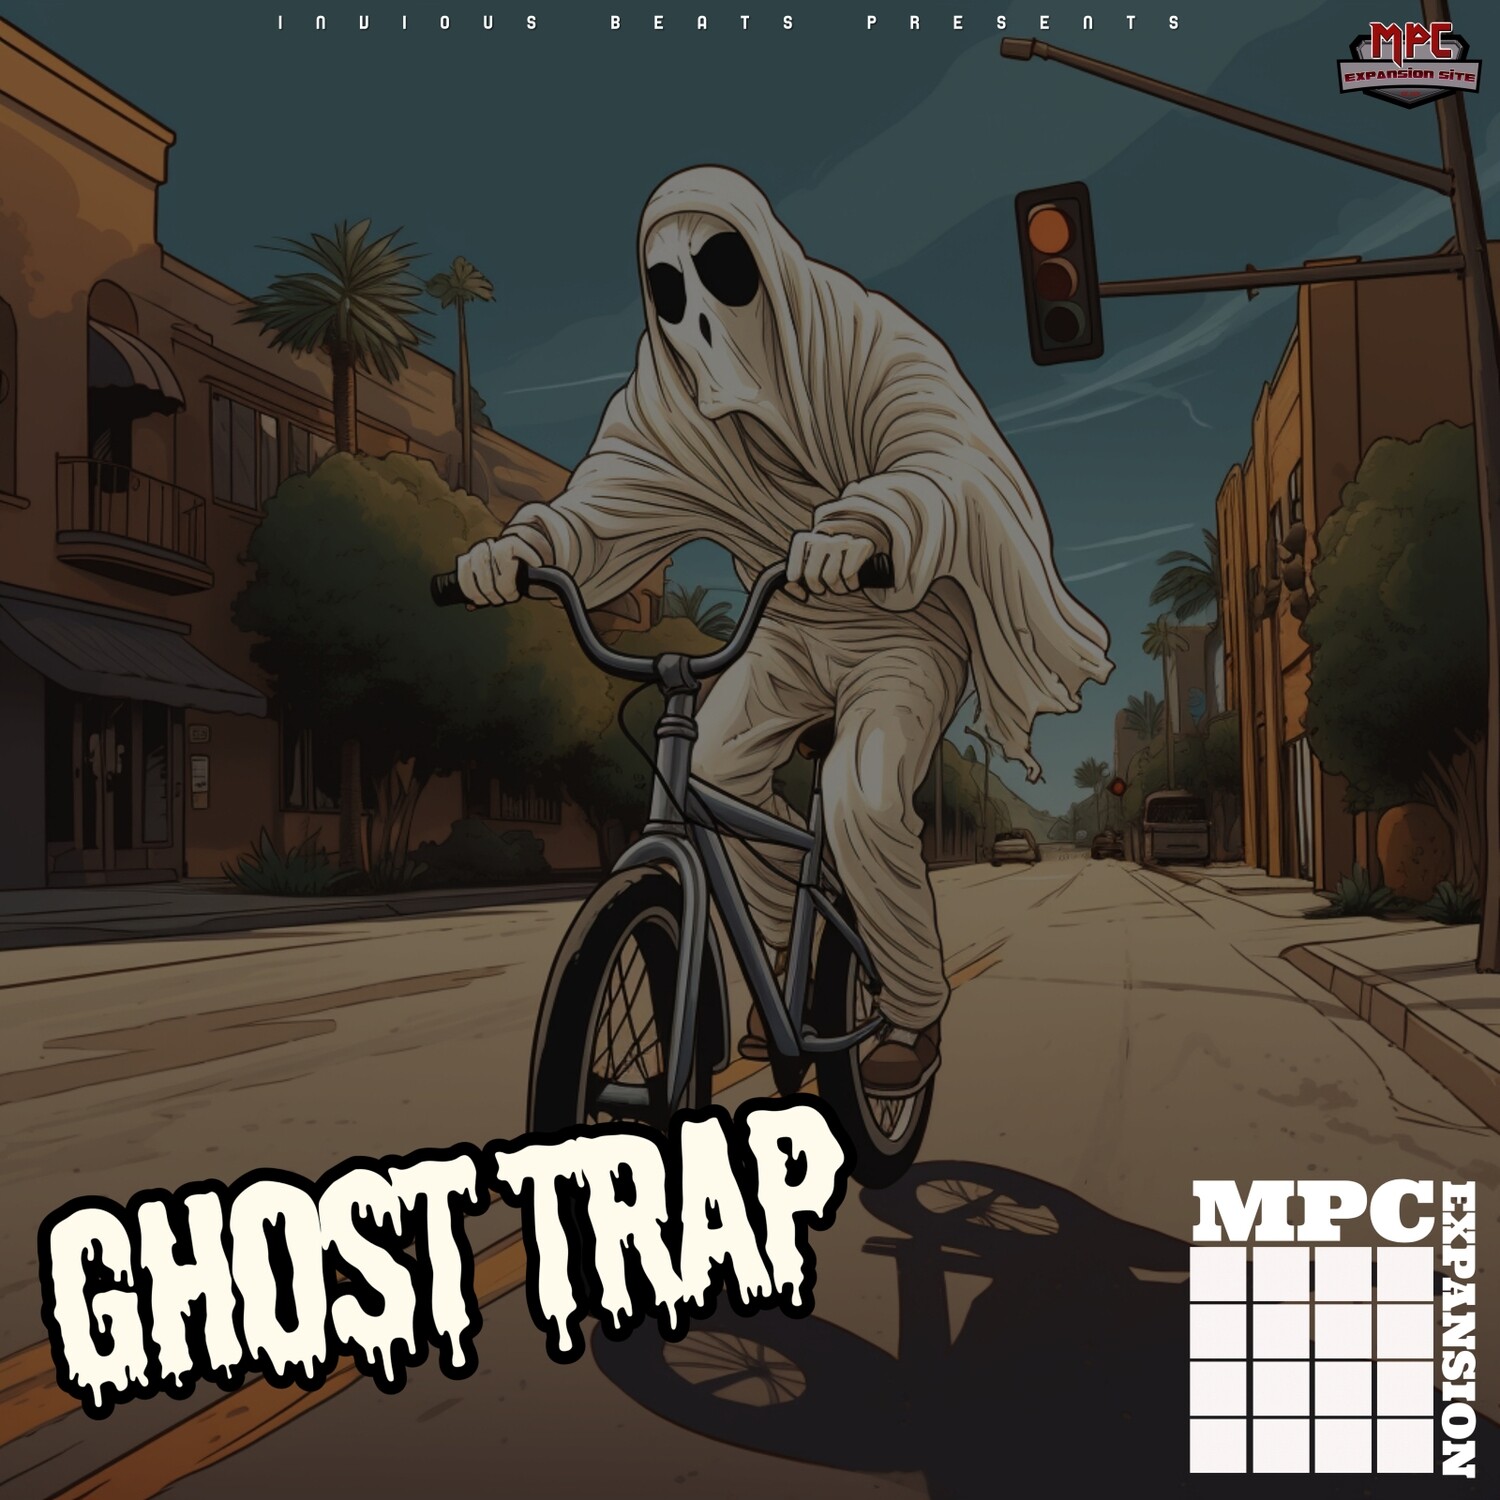 MPC EXPANSION 'GHOST TRAP' by INVIOUS